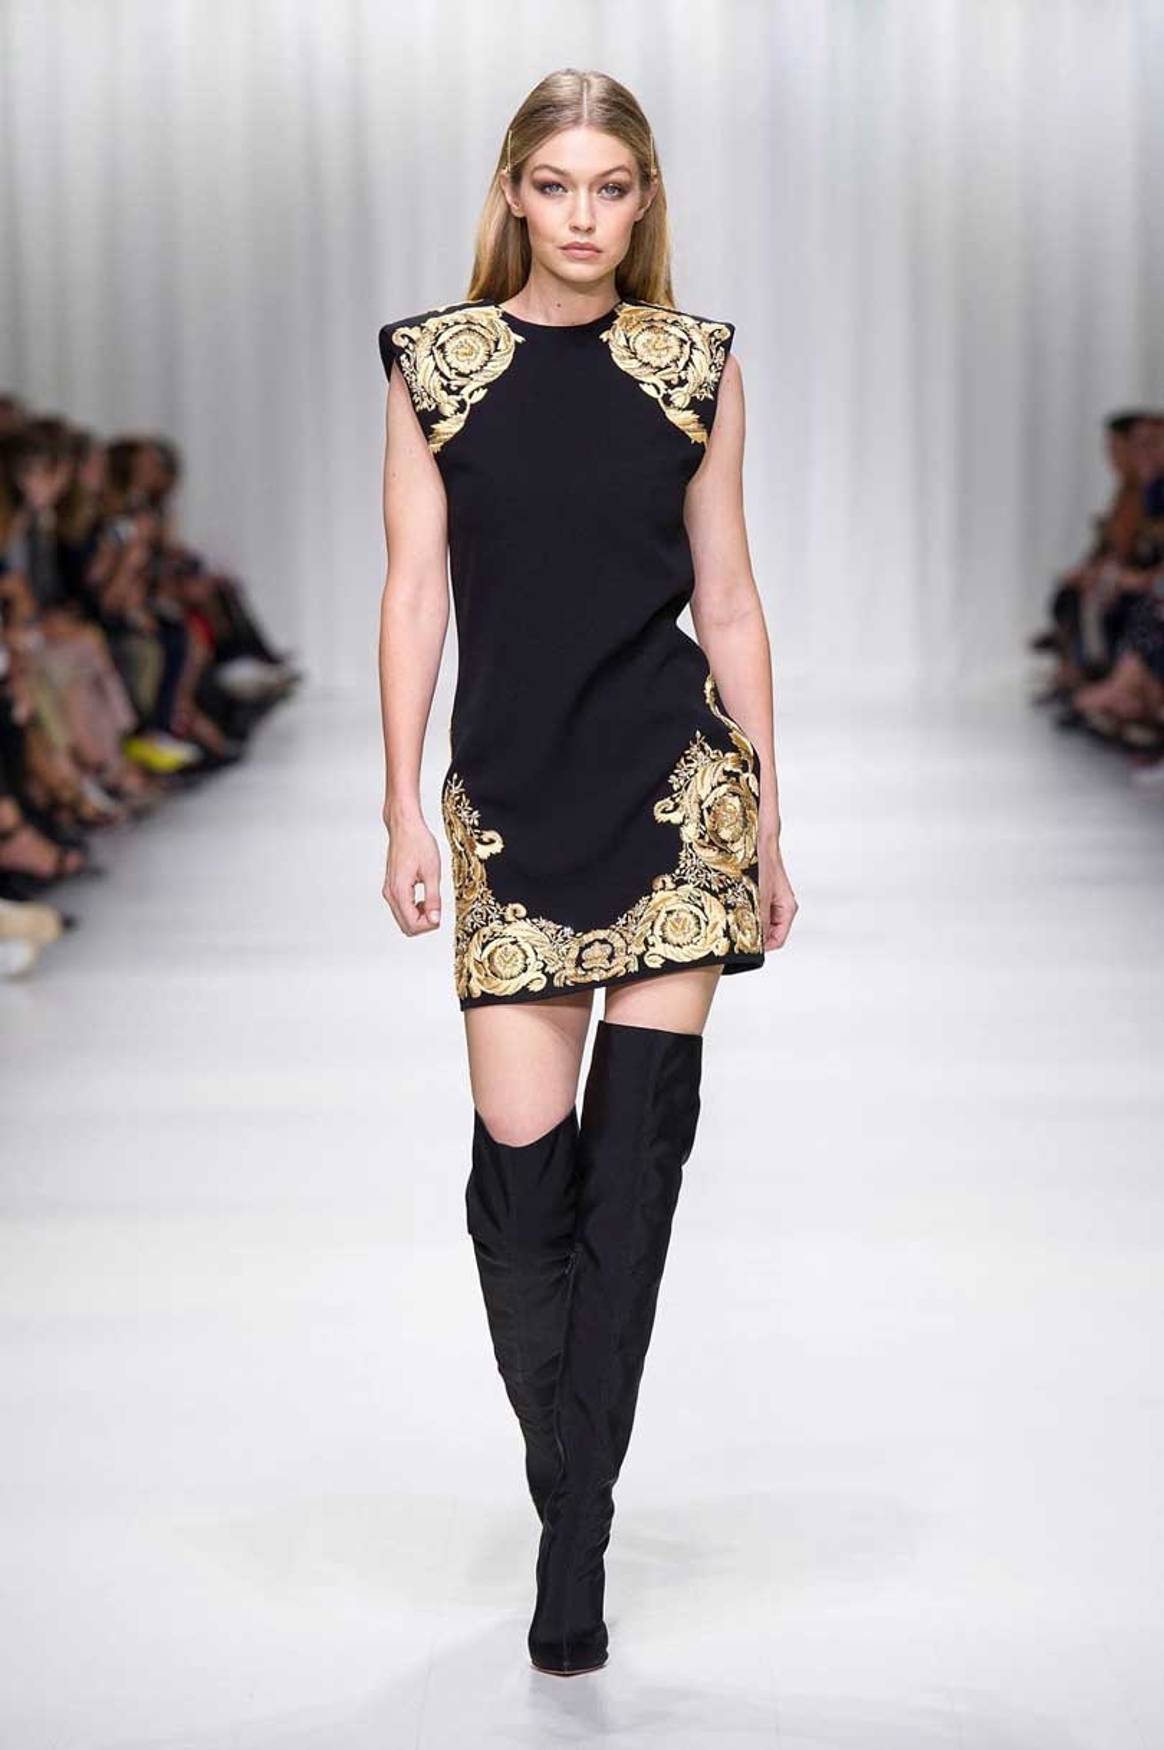 MFW: Versace pays tribute to Gianni Versace